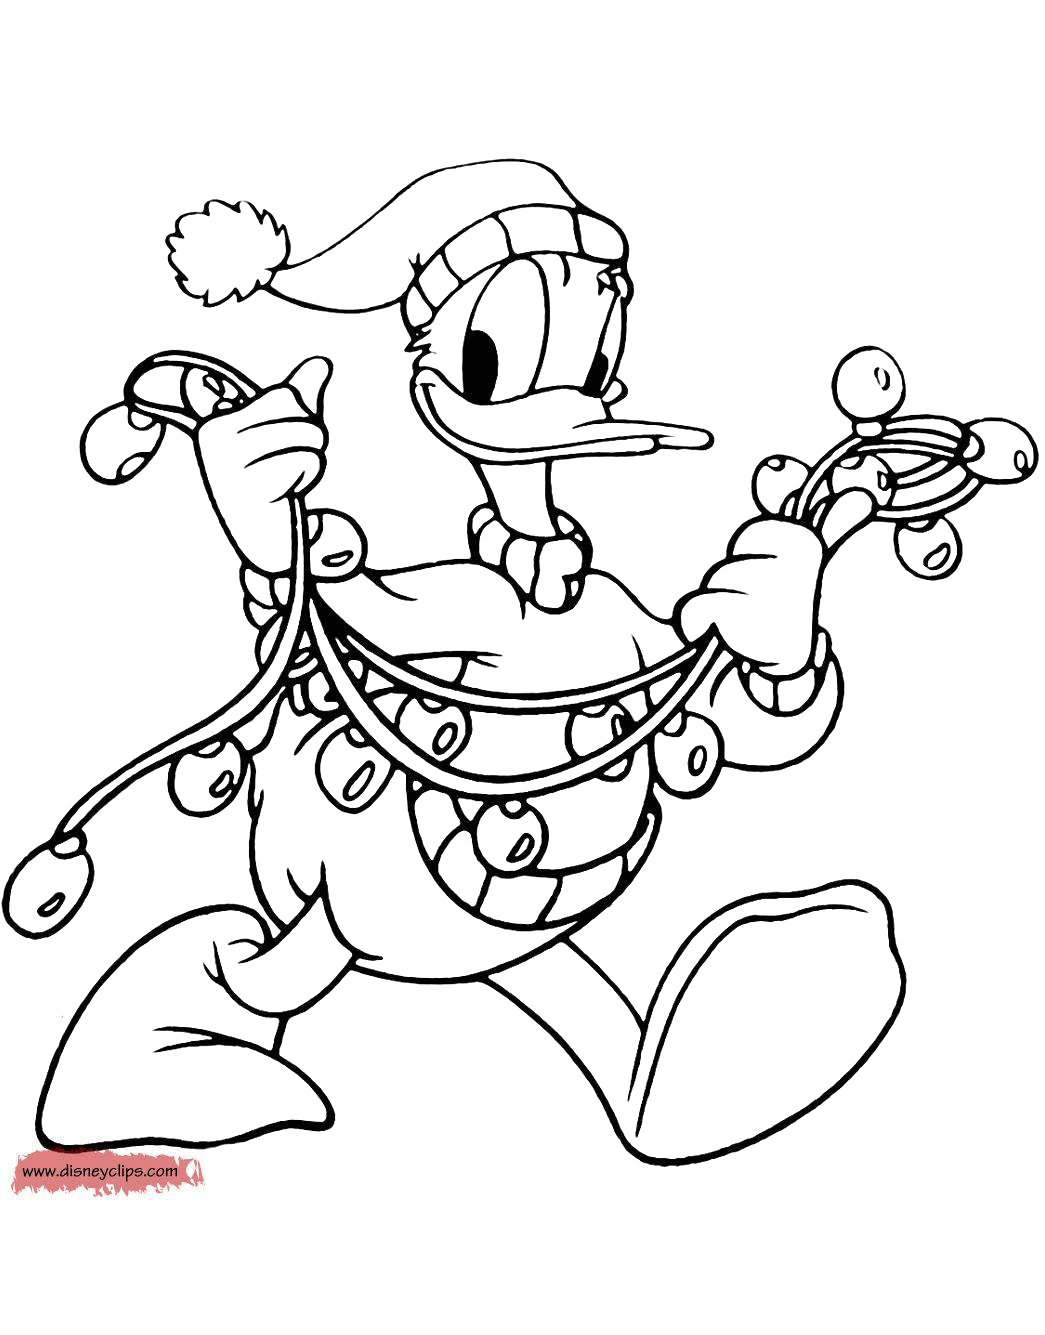 Christmas Lights Color Pages Disney Christmas Coloring Pages 2 Disneyclips